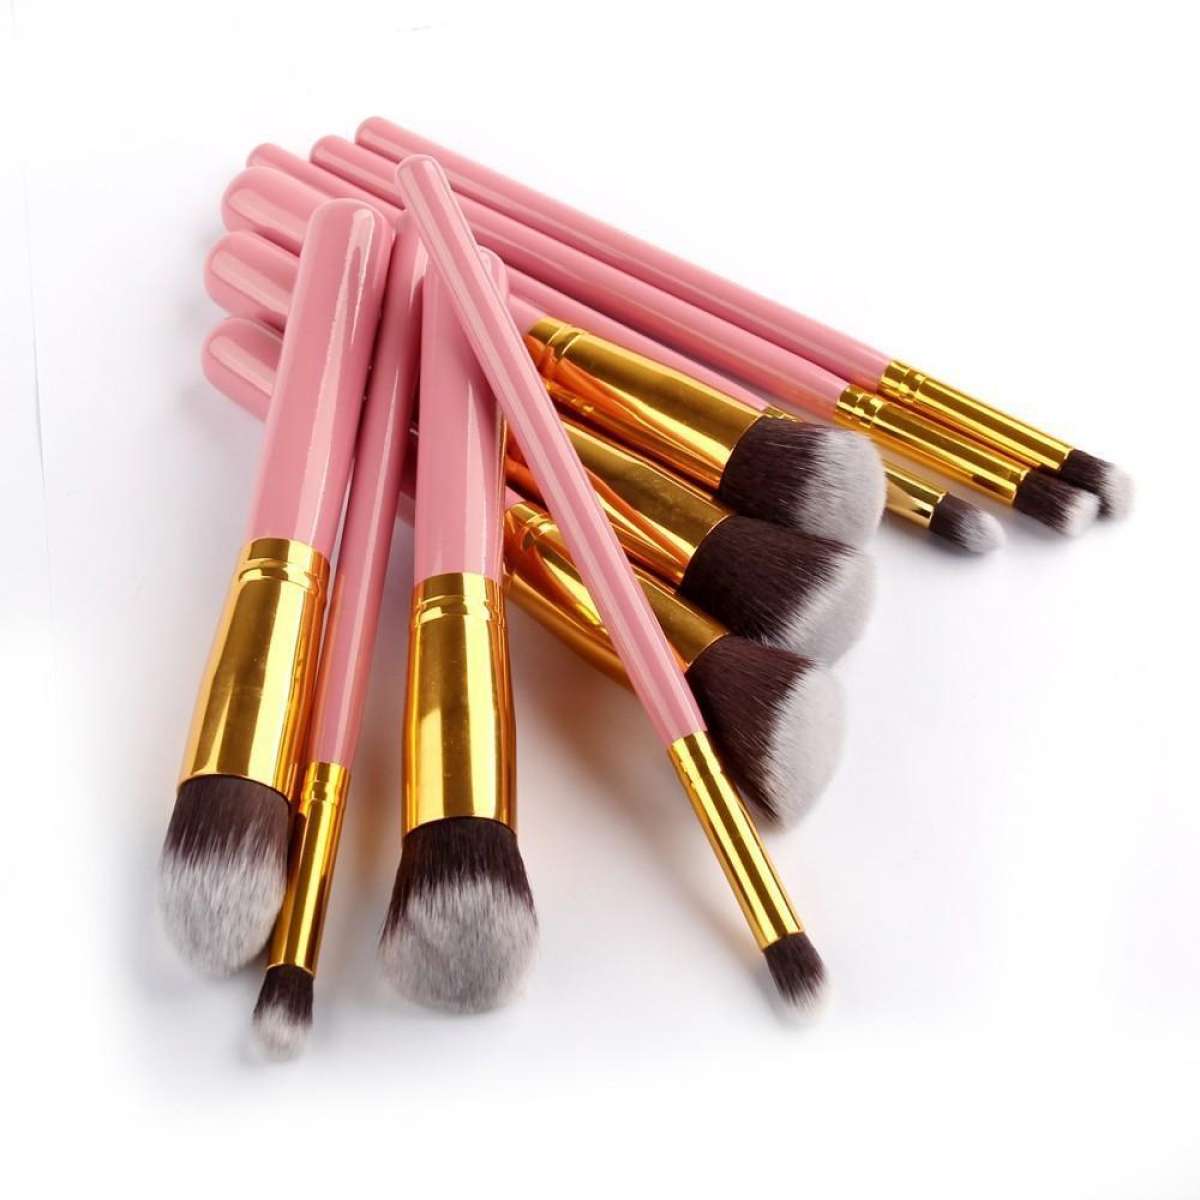 Pасk of 10 Kit High Quаlity Mаkeup Brushes Set [IMPORTED] In Pakistan